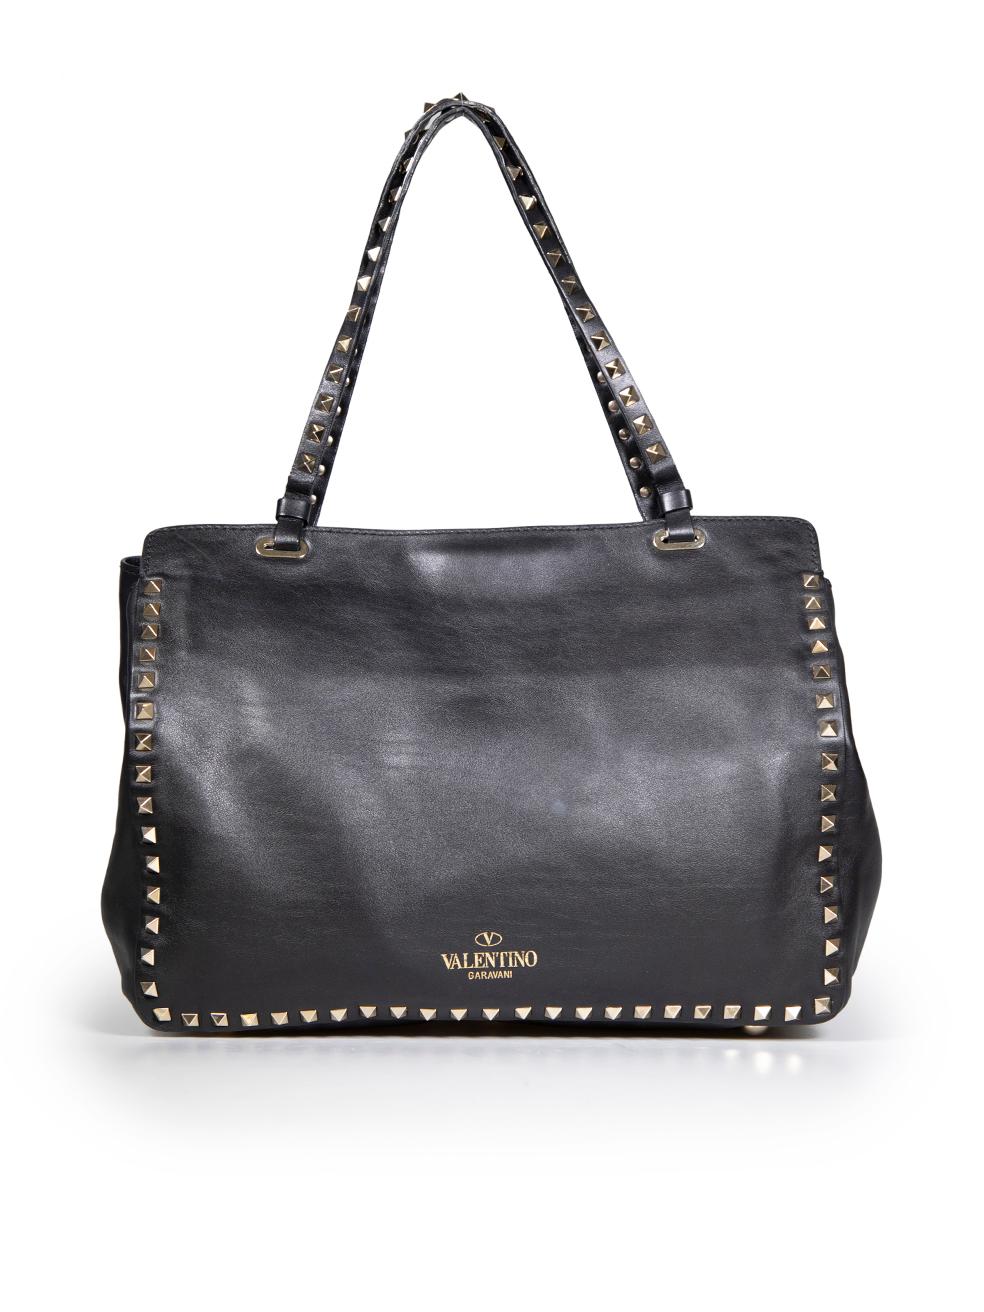 Valentino Black Leather Medium Rockstud Tote Bag In Good Condition For Sale In London, GB